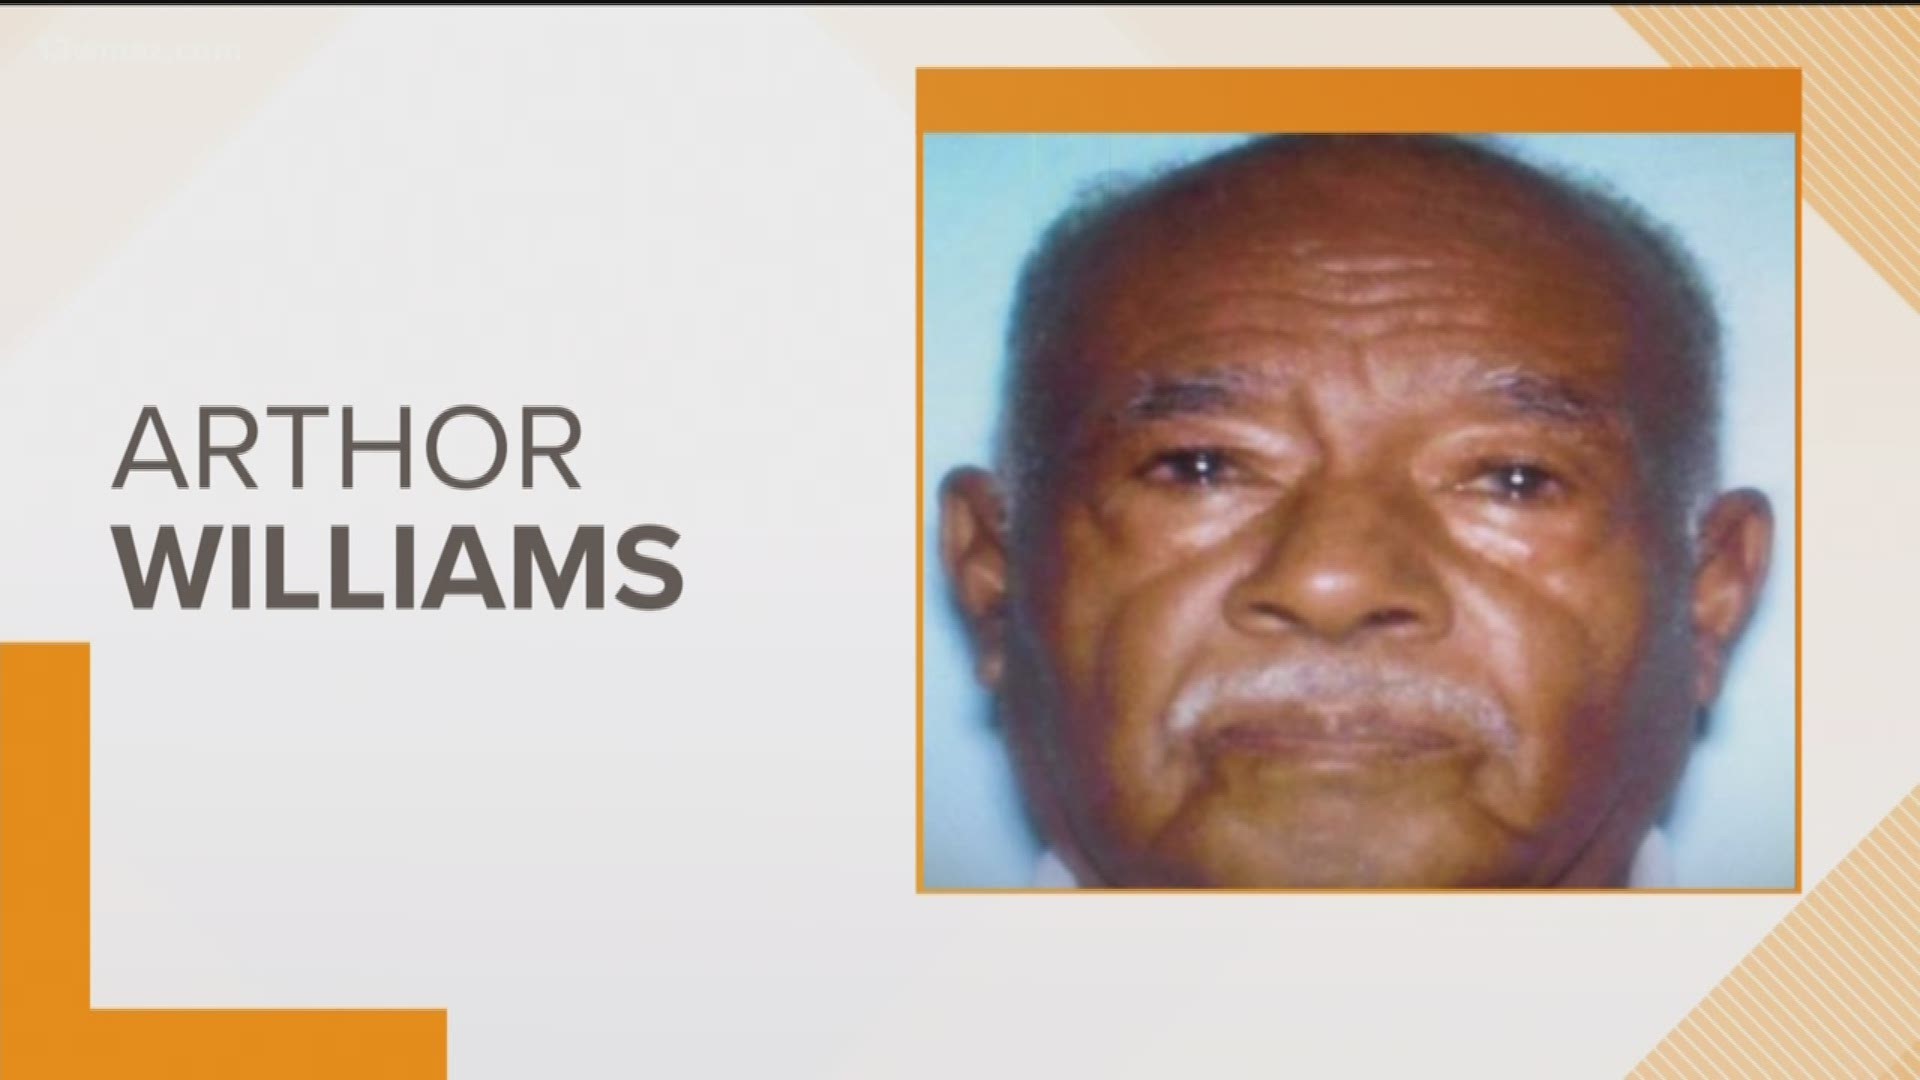 82-year-old Arthor Williams was last seen on Balls Church Road on Friday. Anyone with information should call the Wilkinson County Sheriff's Office at 478-946-2411.